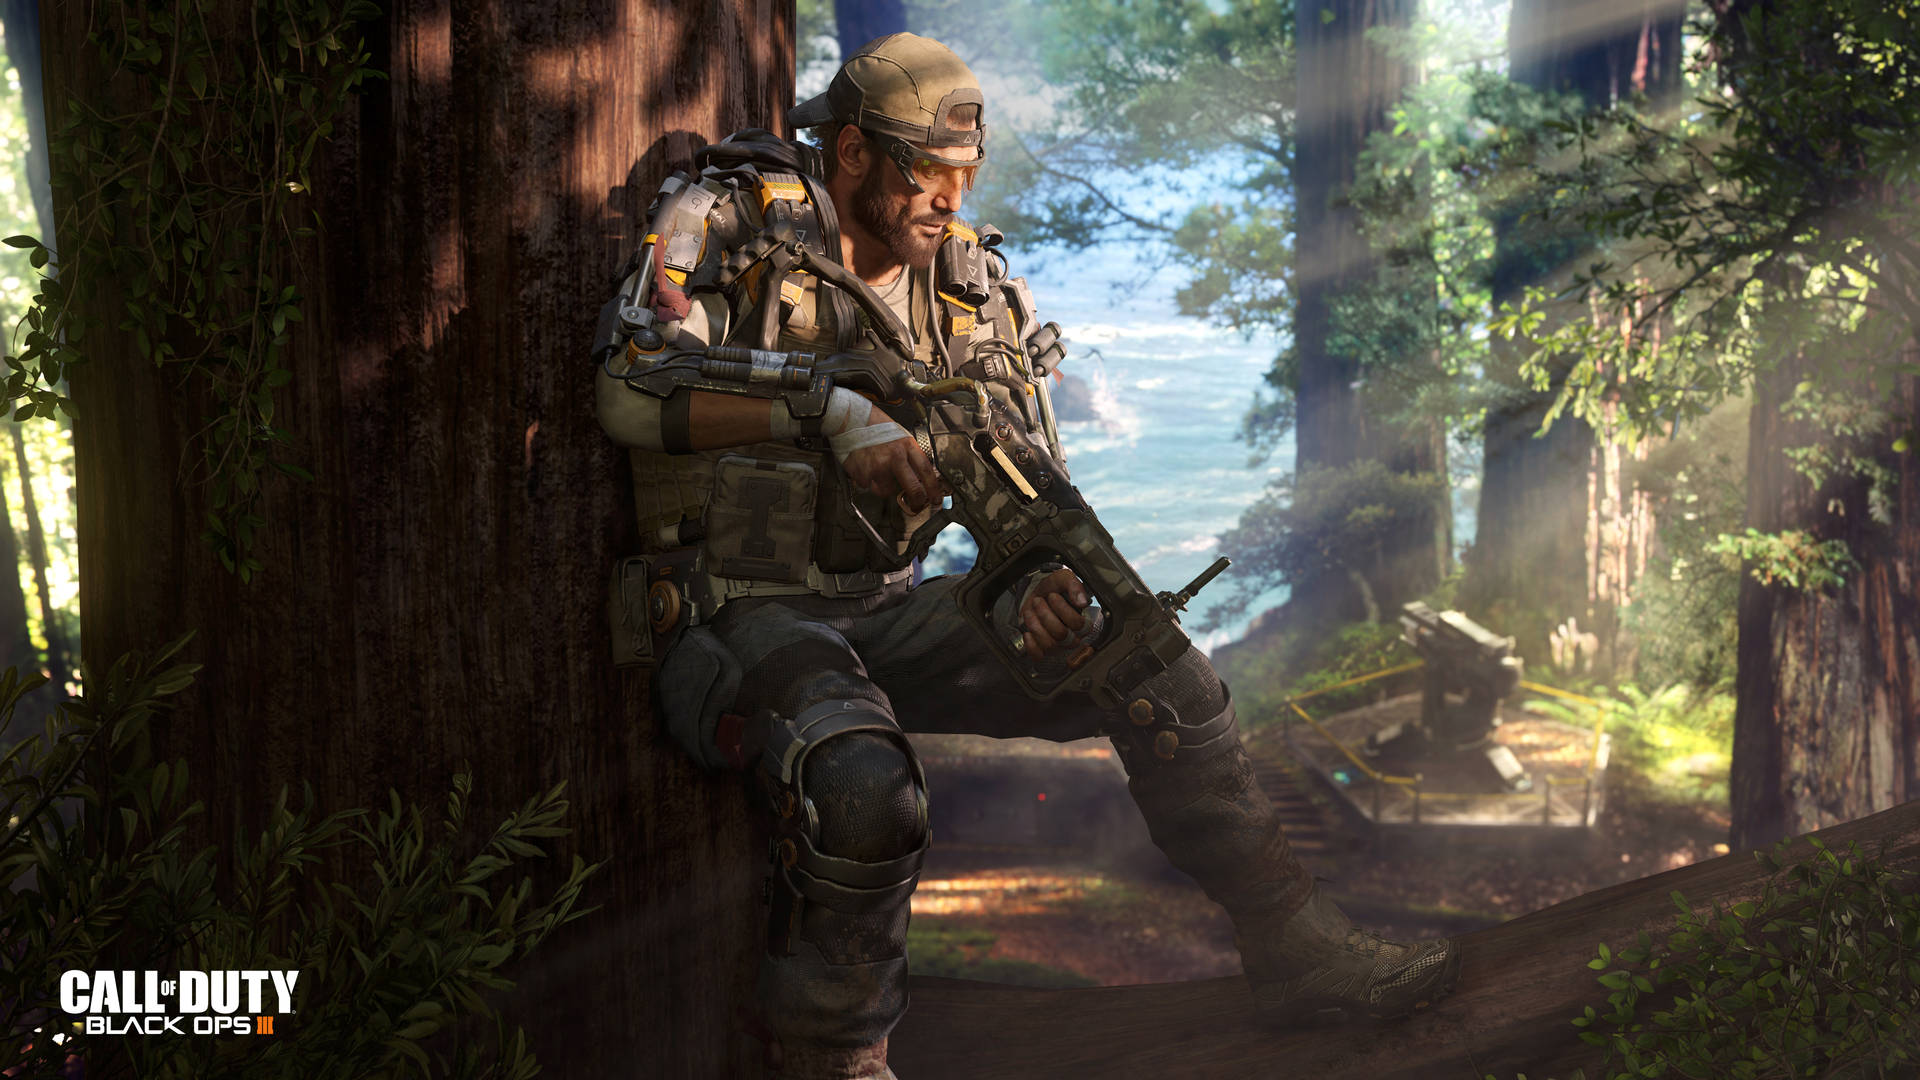 Outwit, outplay and outlast in Call of Duty Black Ops 3 Wallpaper